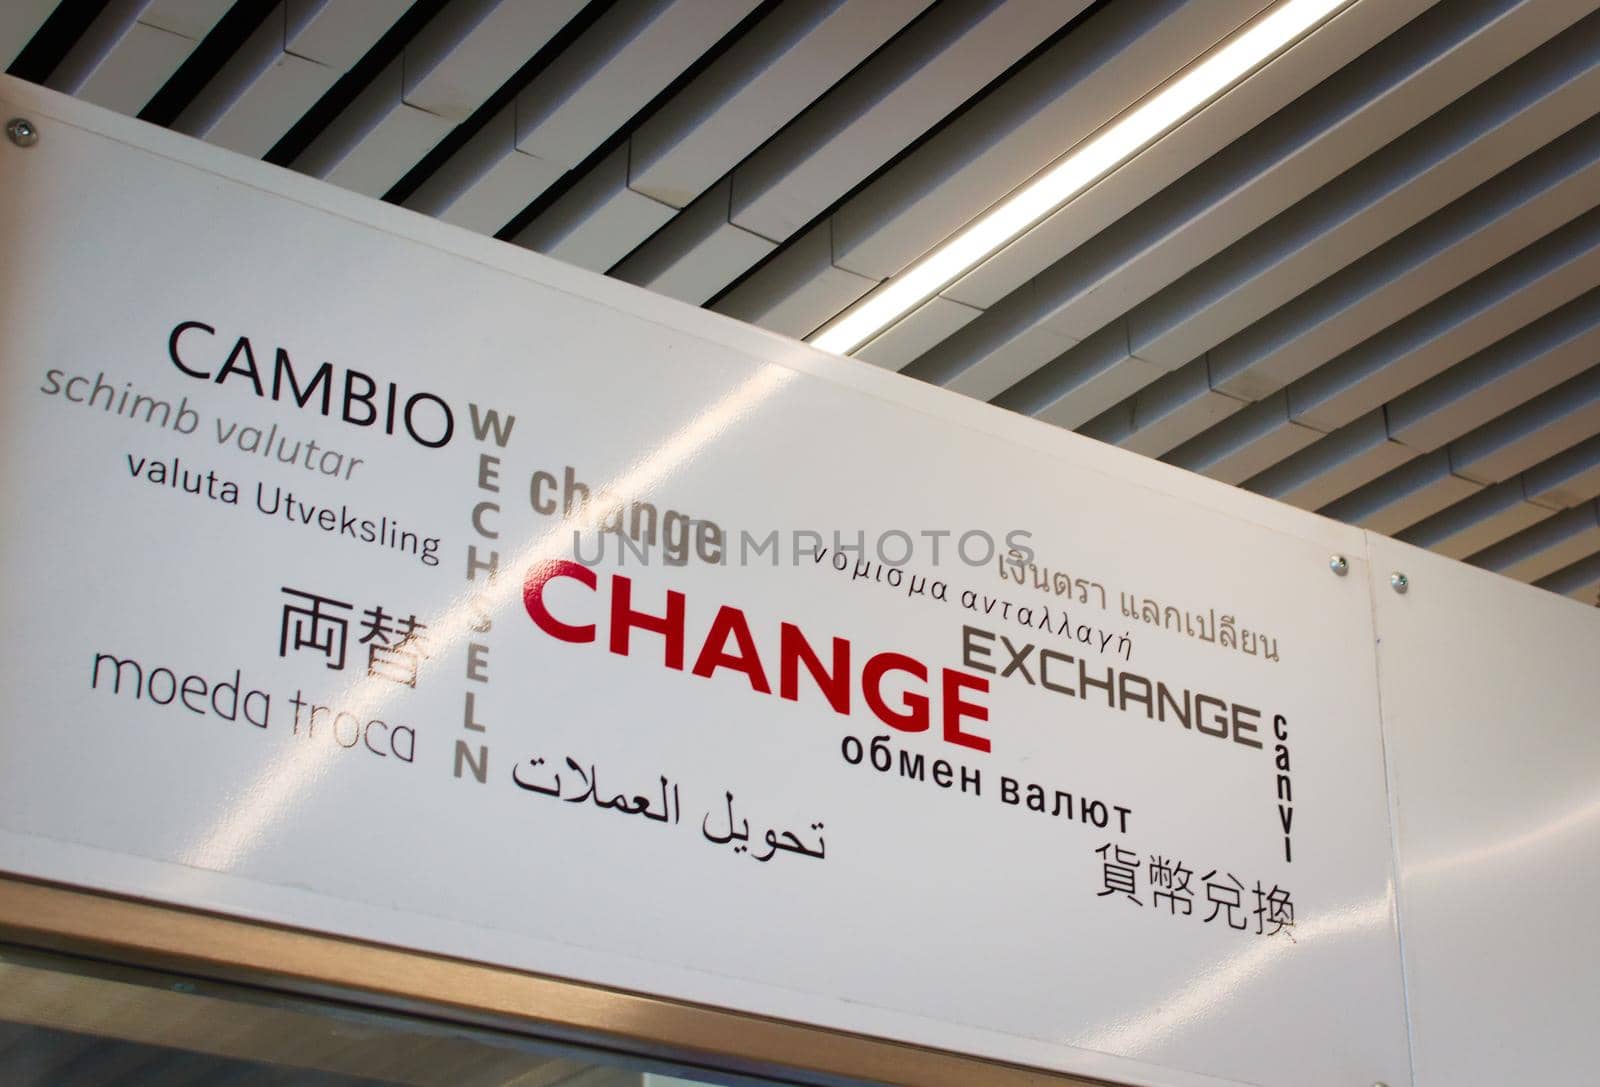 Currency exchange sign at an airport.